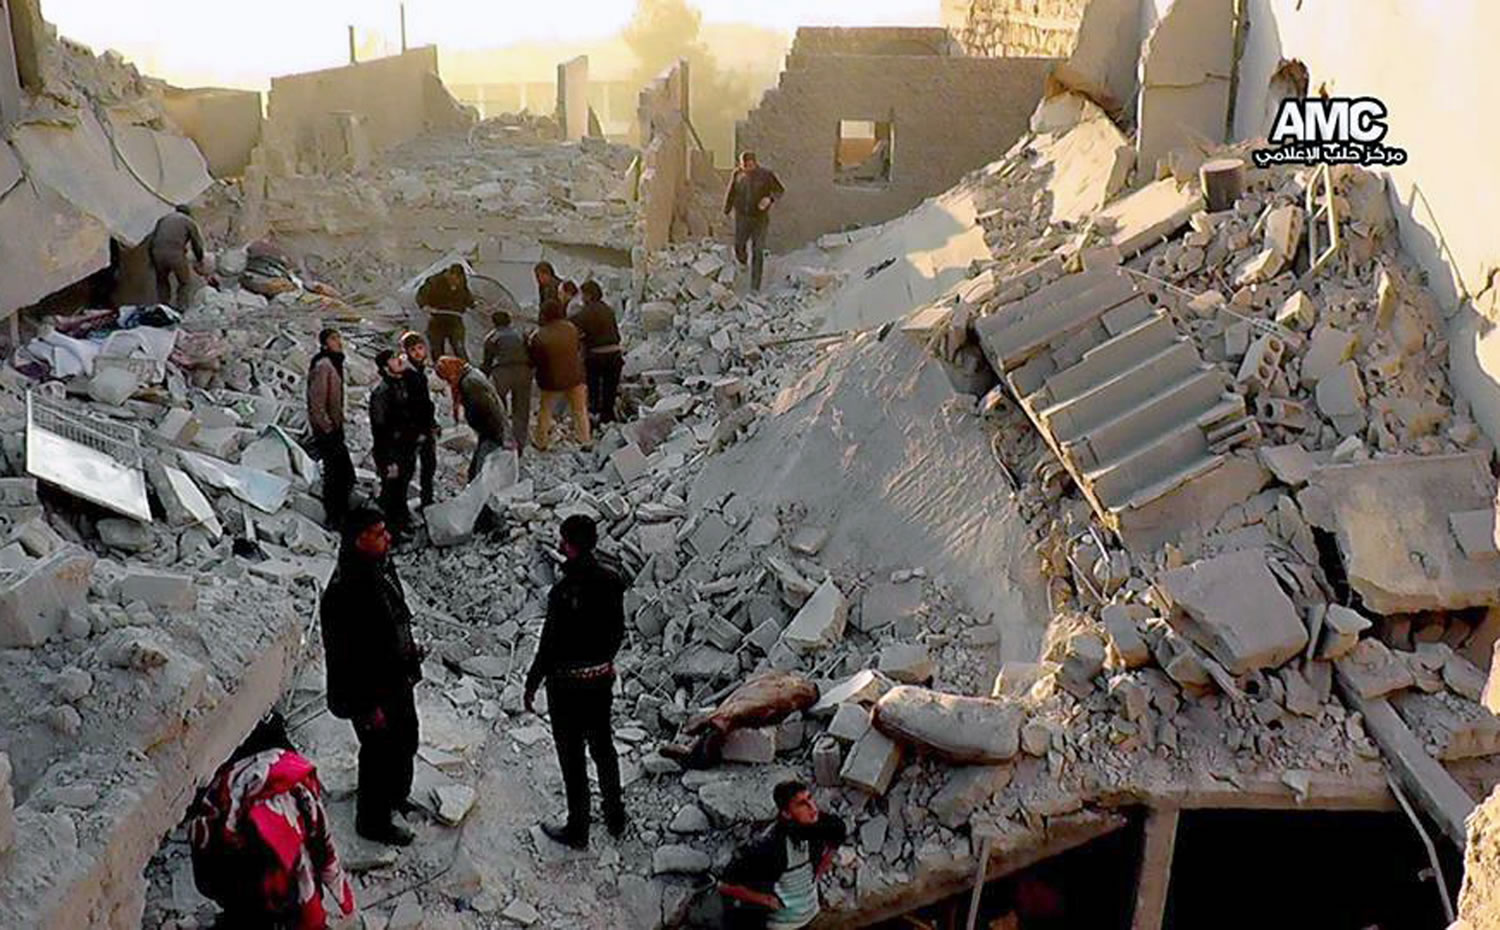 Syrians inspect the rubble of destroyed buildings following a Syrian government airstrike in Aleppo, Syria.